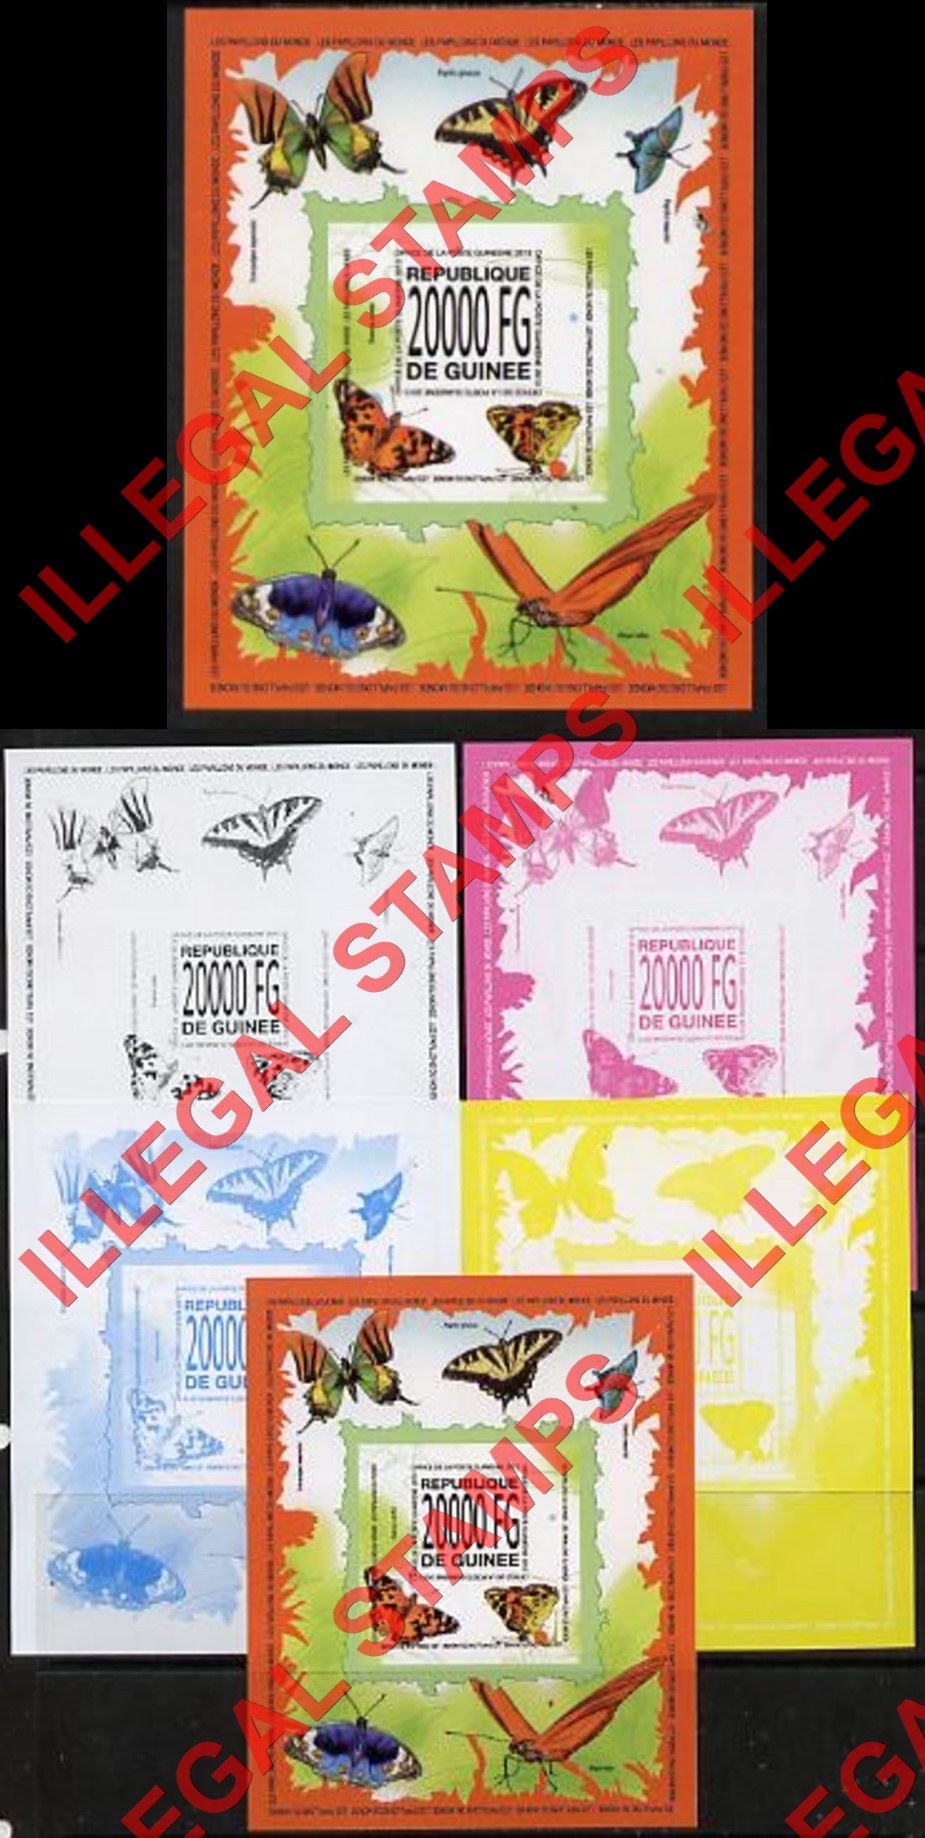 Guinea Republic 2013 Butterflies Counterfeit Illegal Stamp with Matching Color Proofs (Set 3)